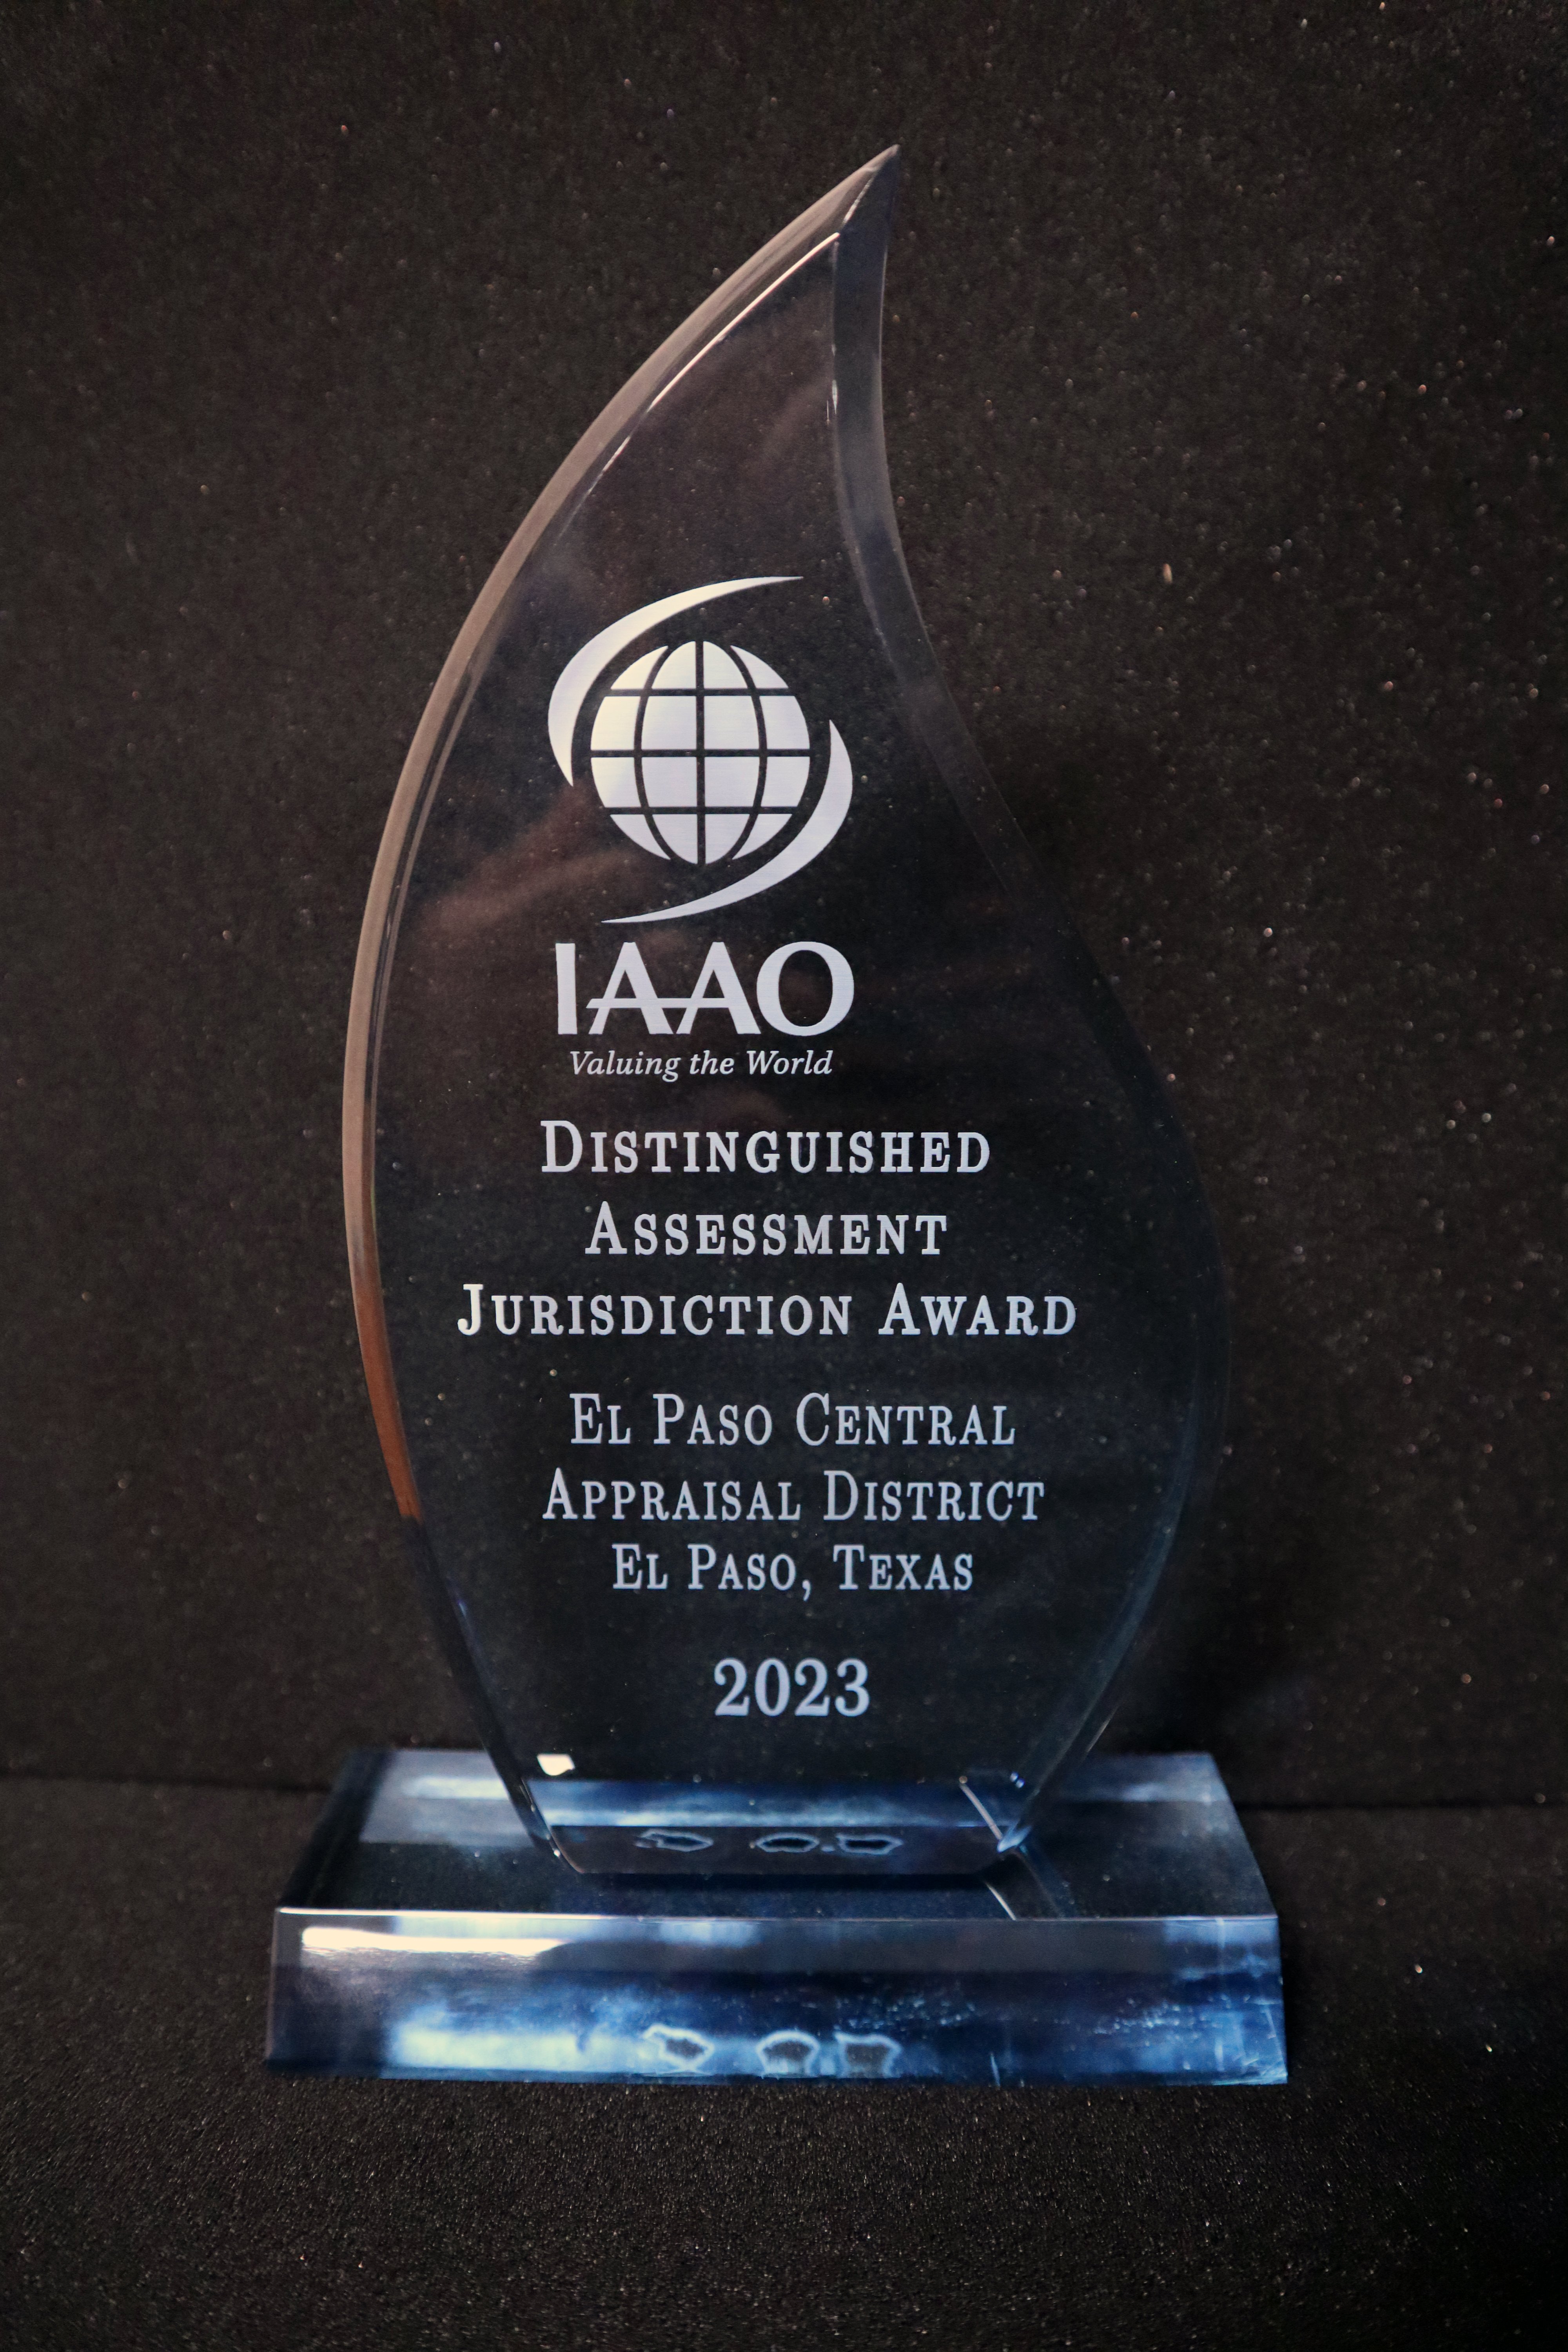 Photo of the physical trophy for the 2023 IAAO's Distinguished Assessment Jurisdiction Award